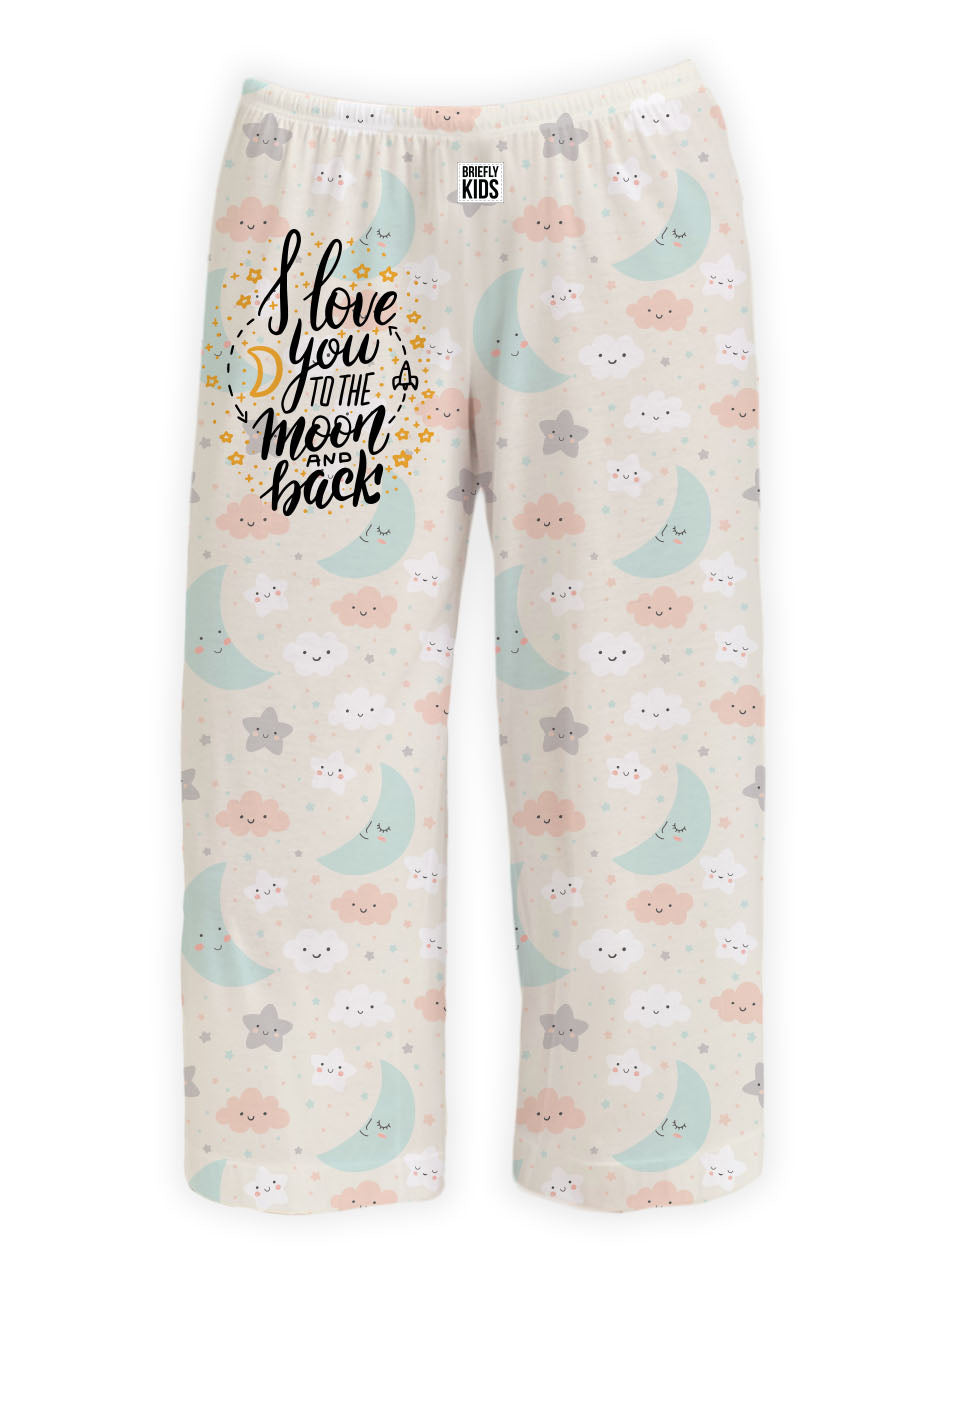 BRIEF INSANITY Briefly Kids | I Love You to the Moon and Back Pajama Pants